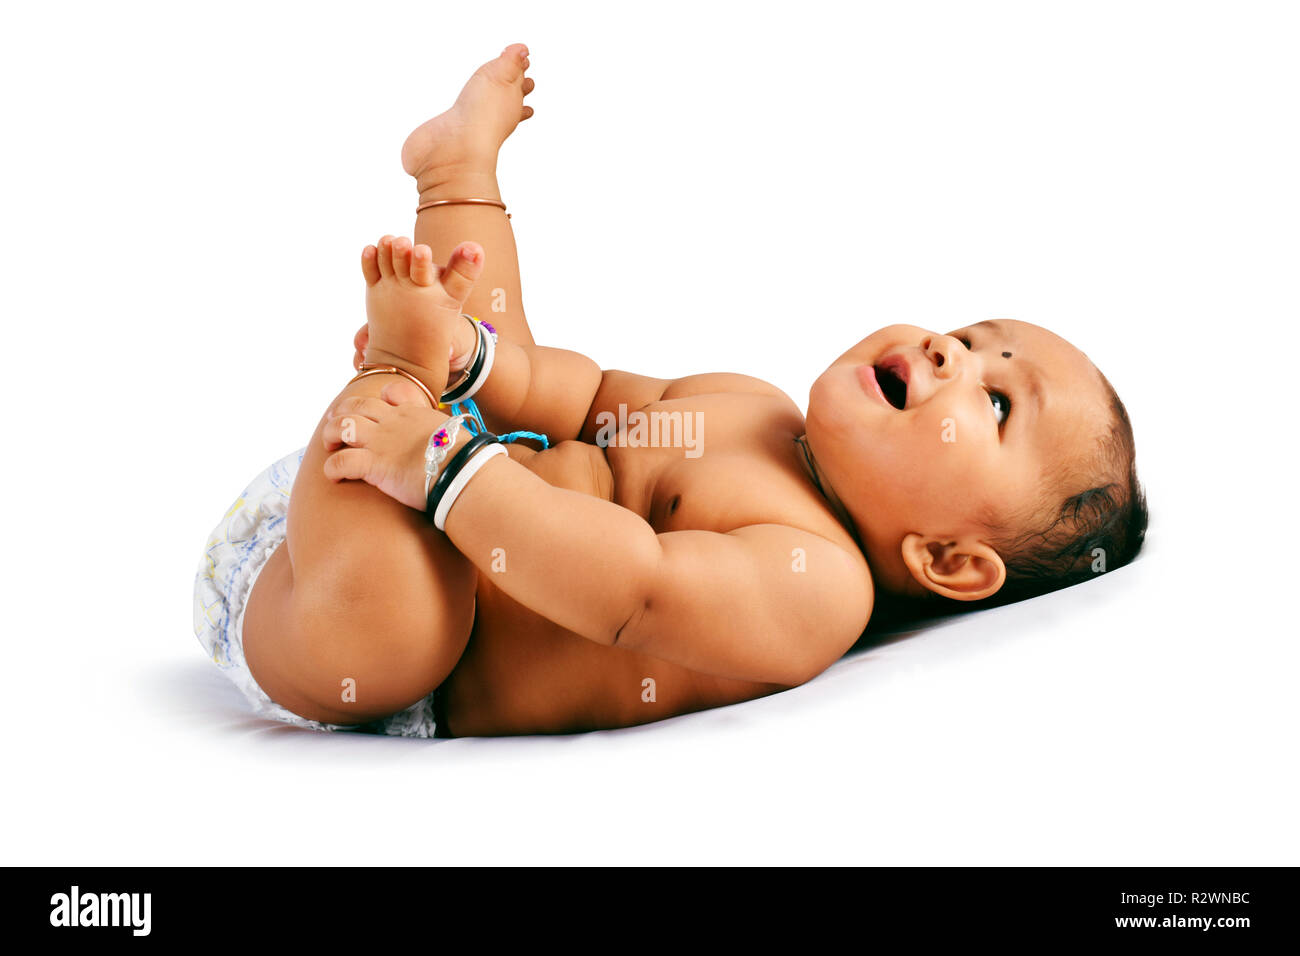 Cute baby sleeping on bed holding his feet and laughing, Pune, Maharashtra. Stock Photo